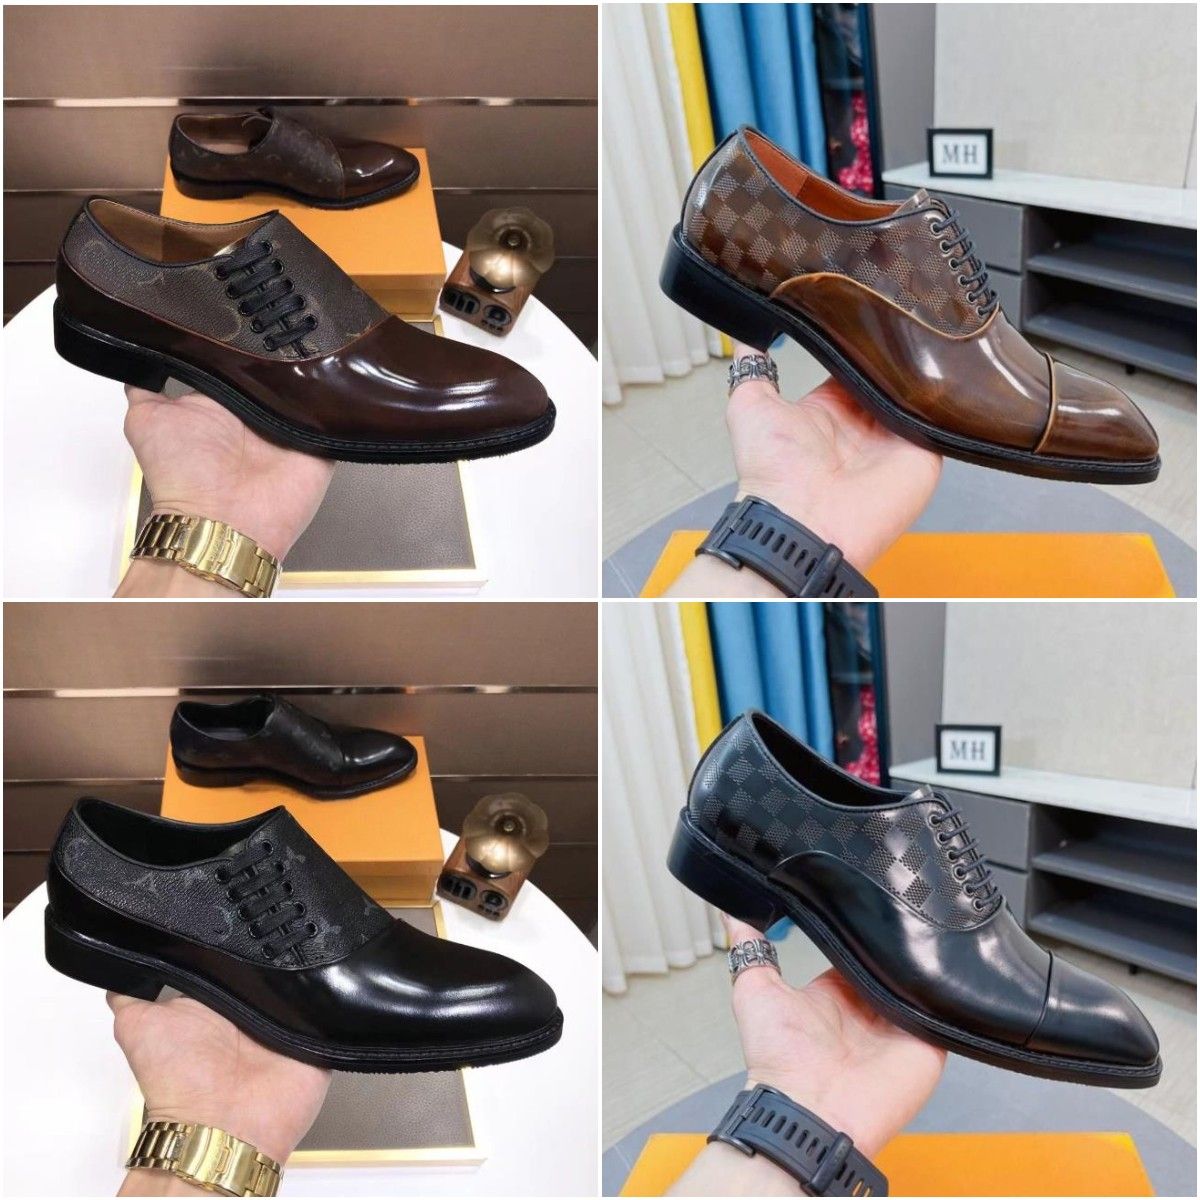 minister derby shoes